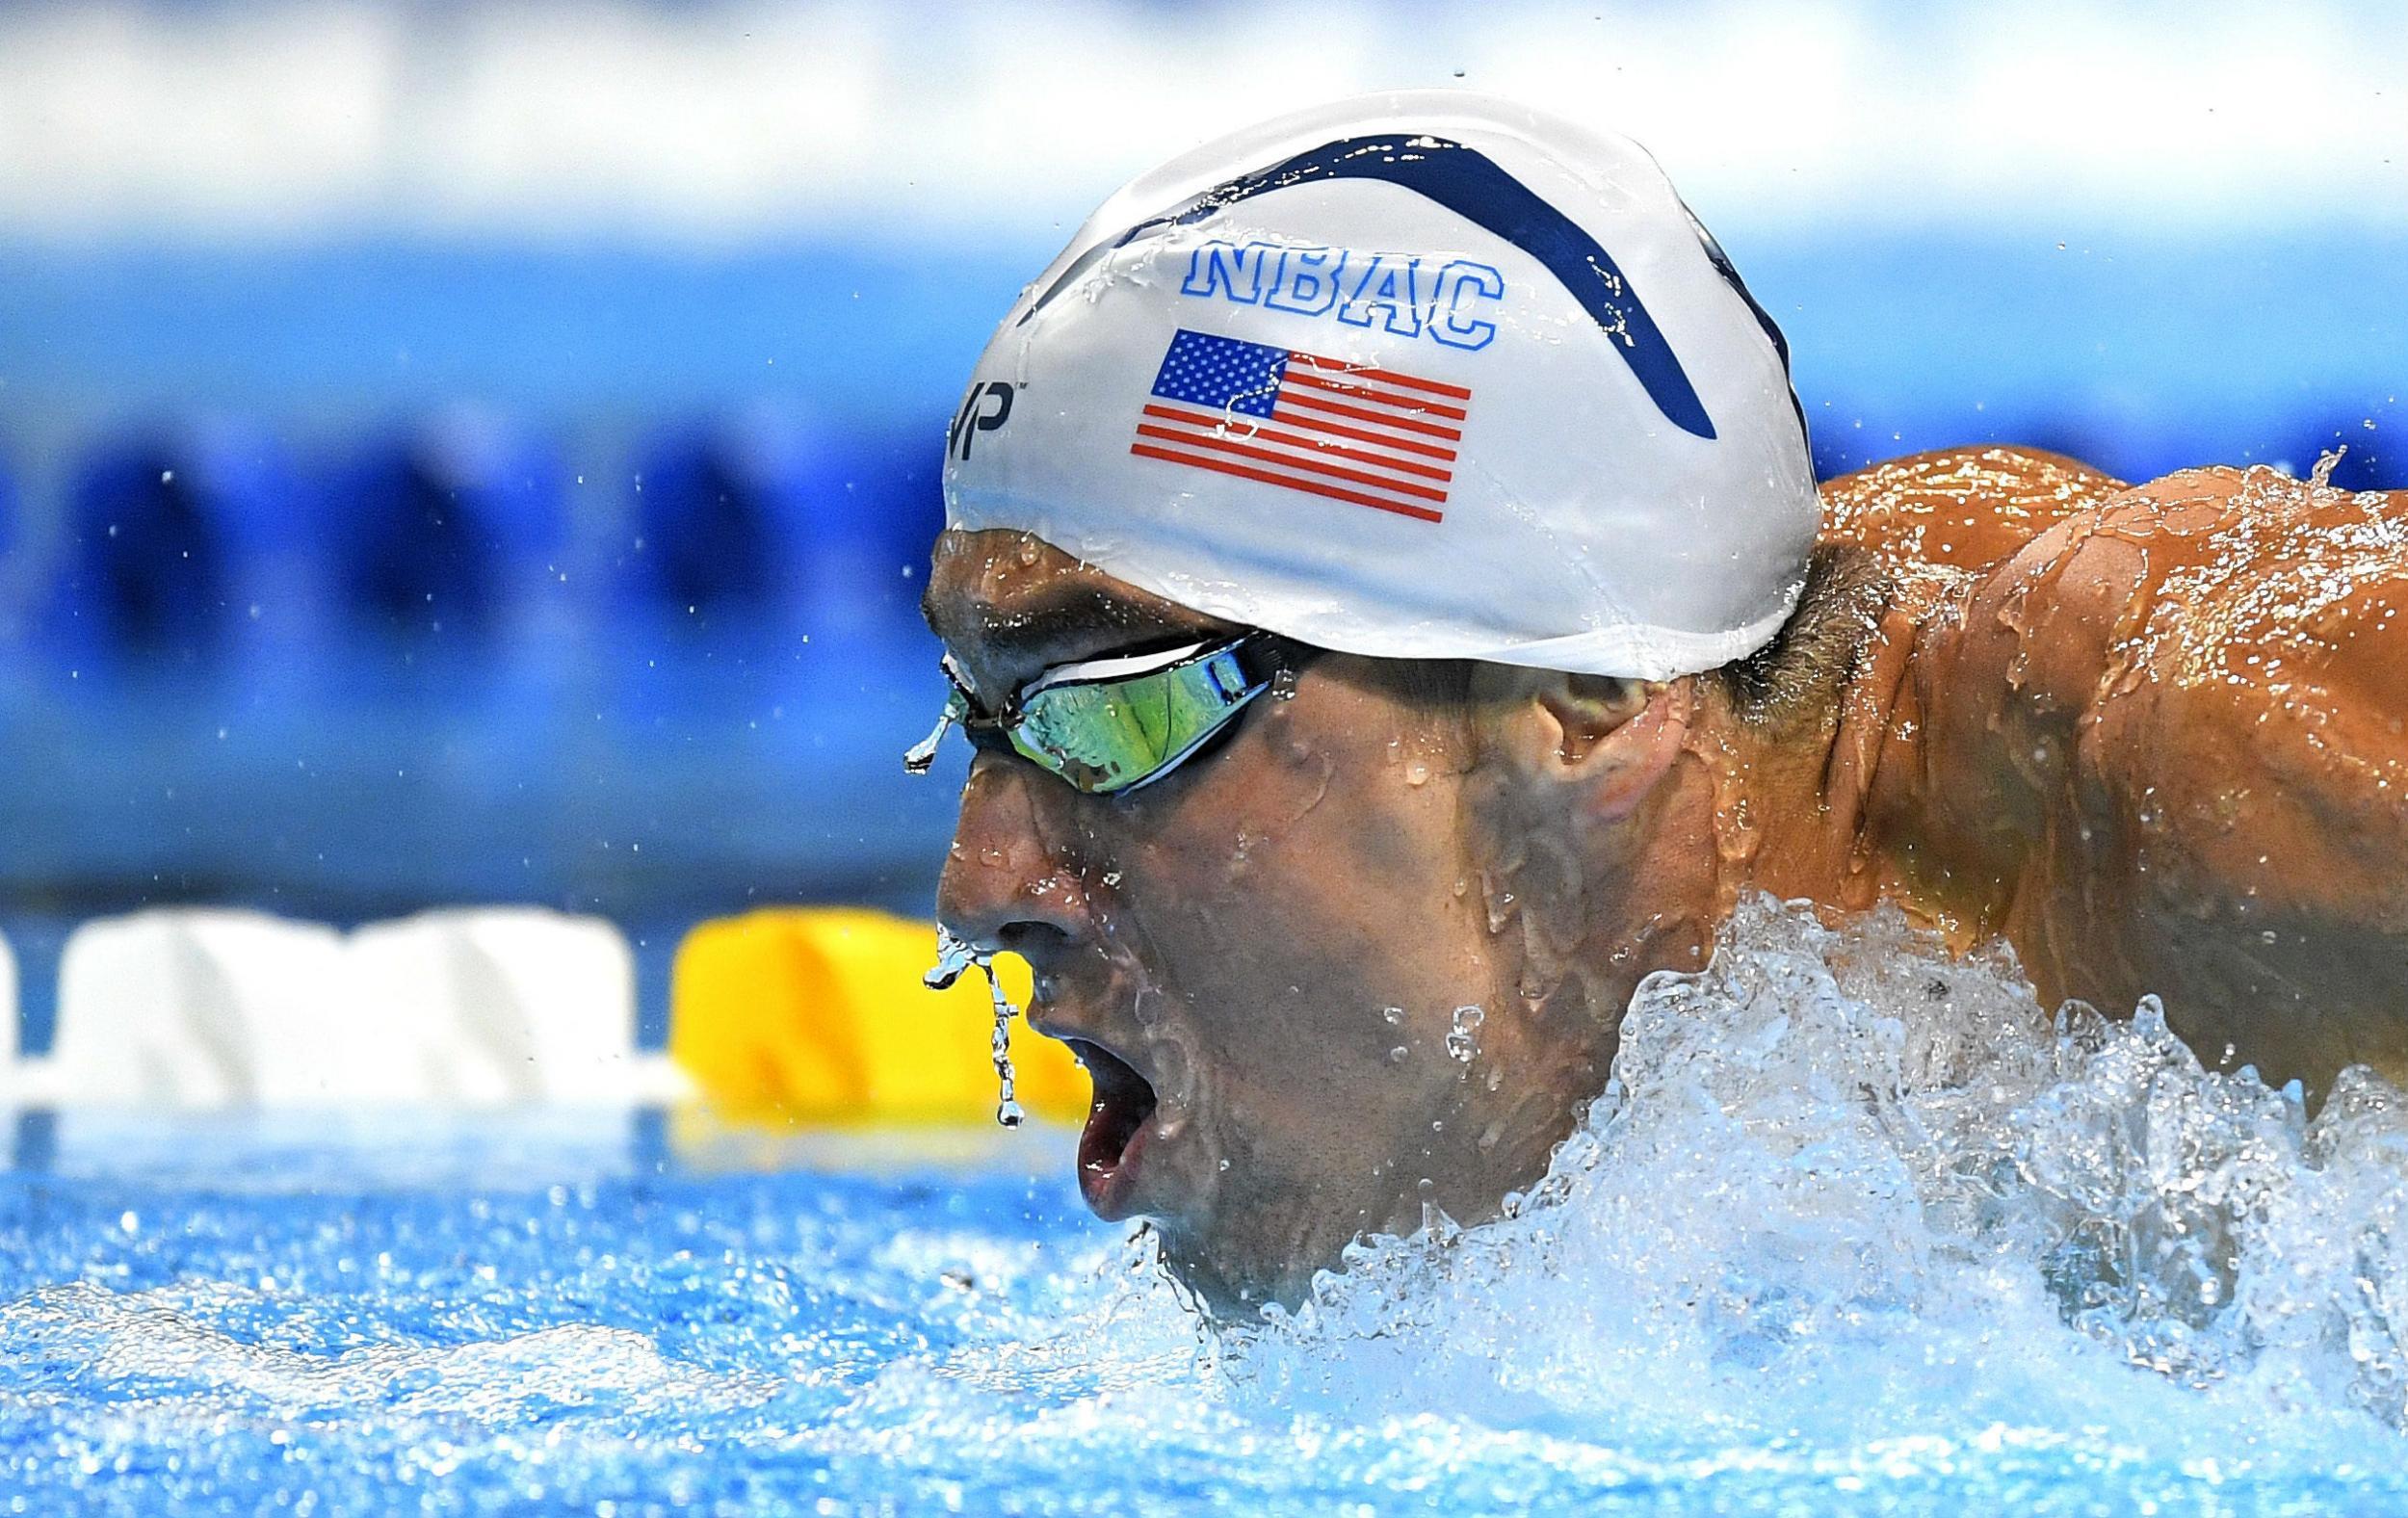 No American swimmer has qualified for five Olympics - until now